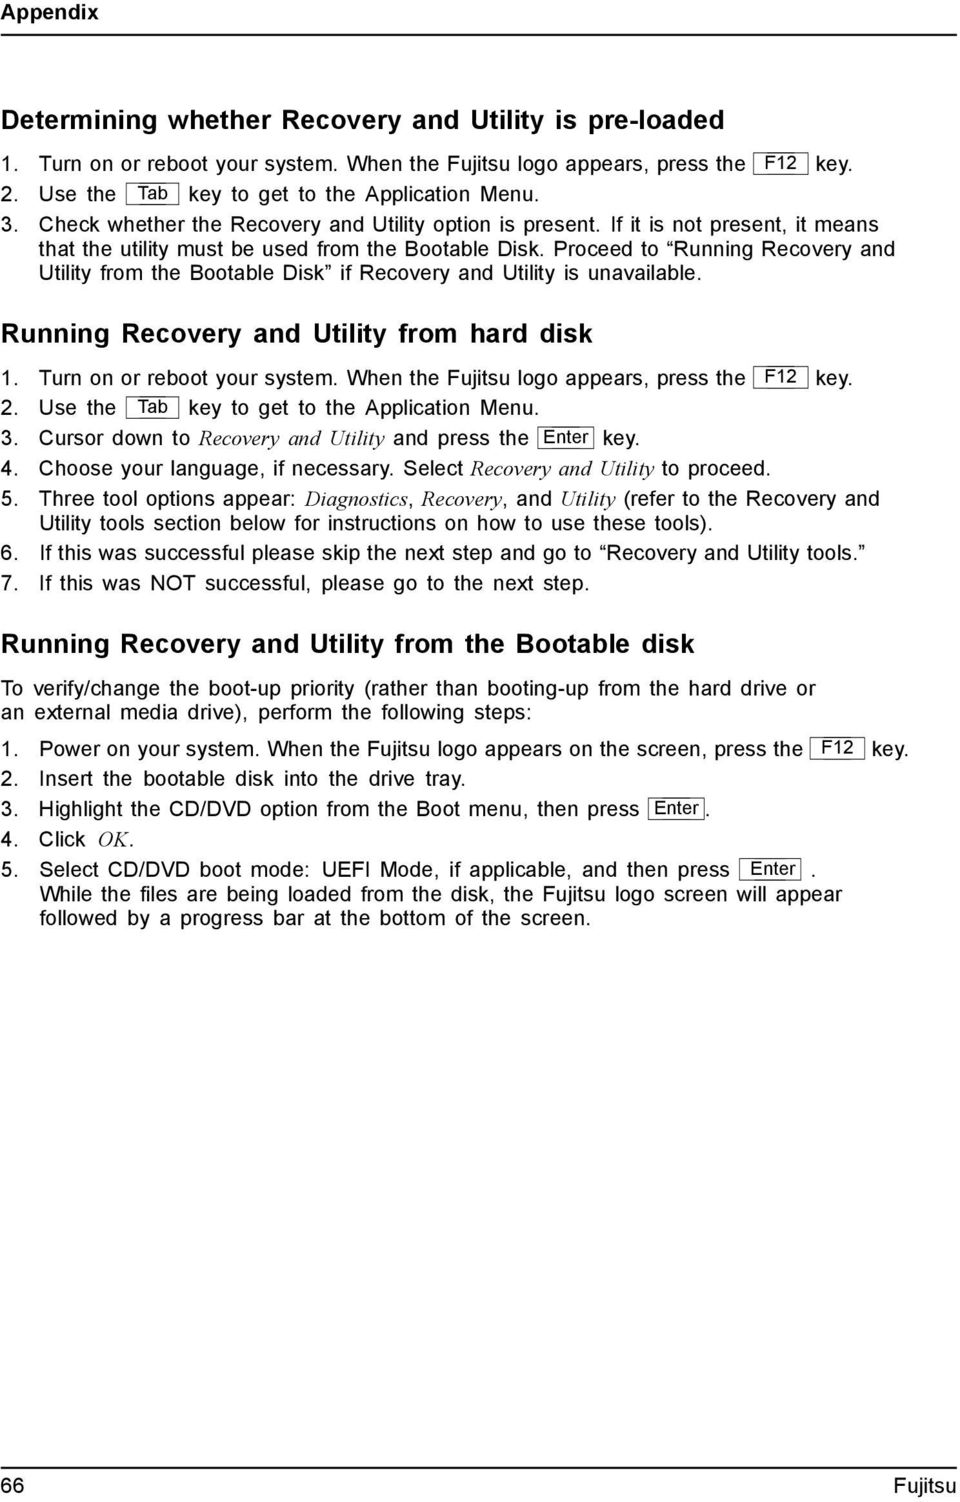 Proceed to Running Recovery and Utility from the Bootable Disk if Recovery and Utility is unavailable. Running Recovery and Utility from hard disk 1. Turn on or reboot your system.